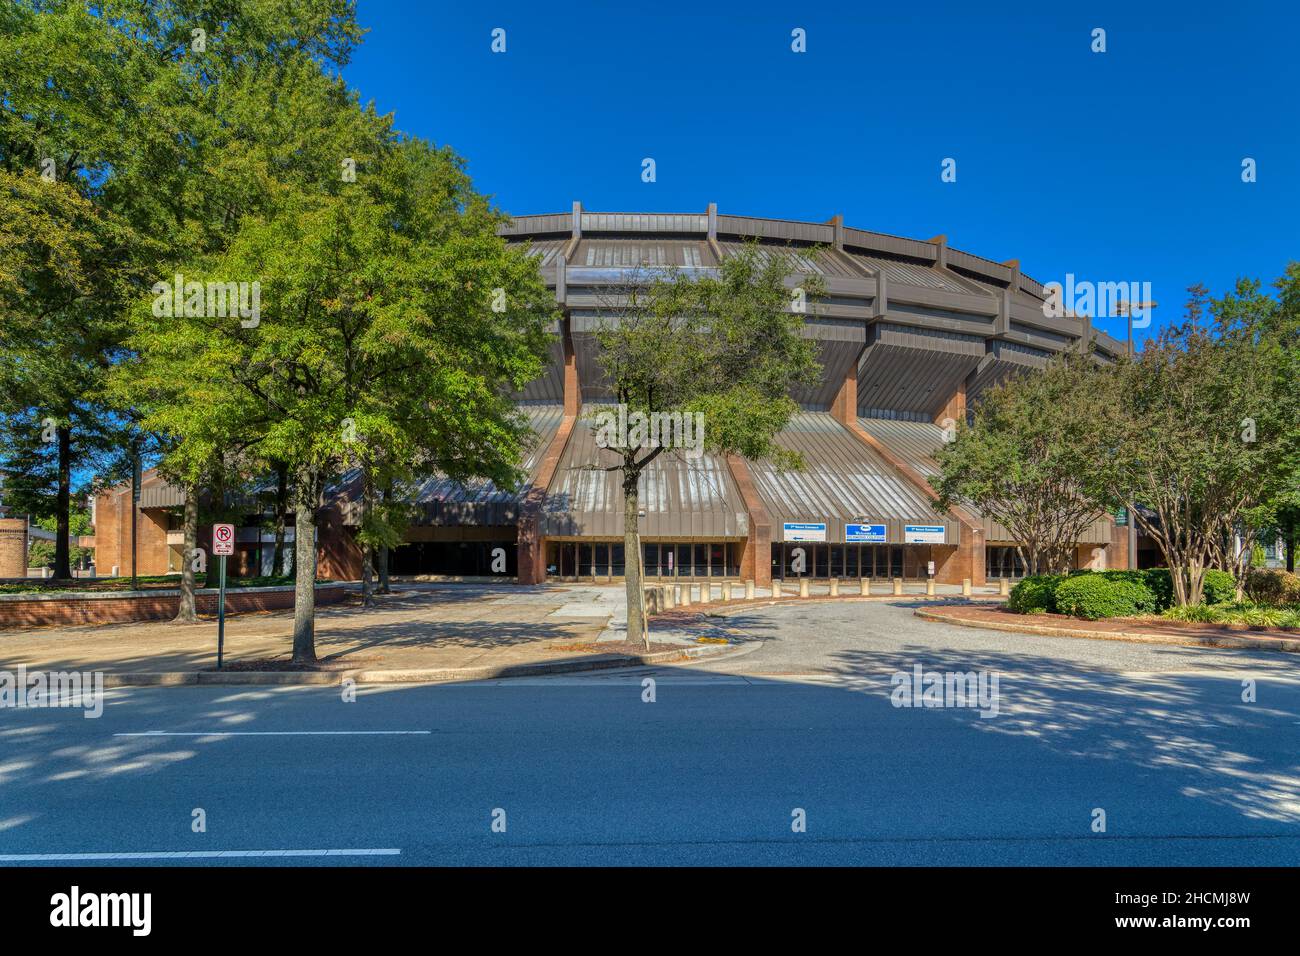 Richmond Coliseum, now closed, was once Virginia's largest sports arena. Stock Photo